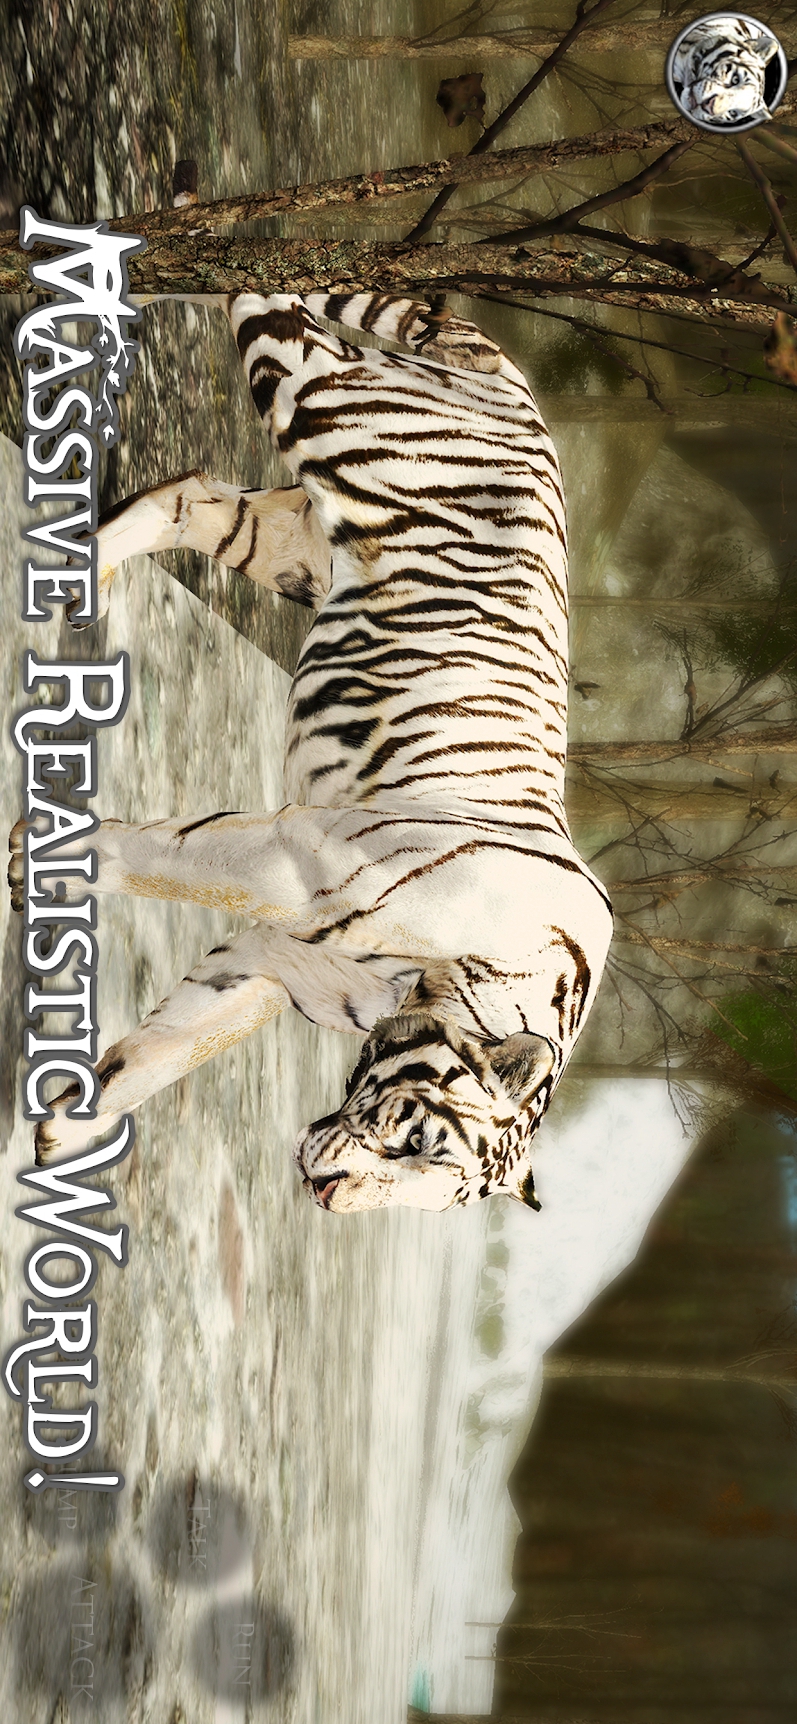 Ultimate Tiger Simulator 2(More attribute points are used)